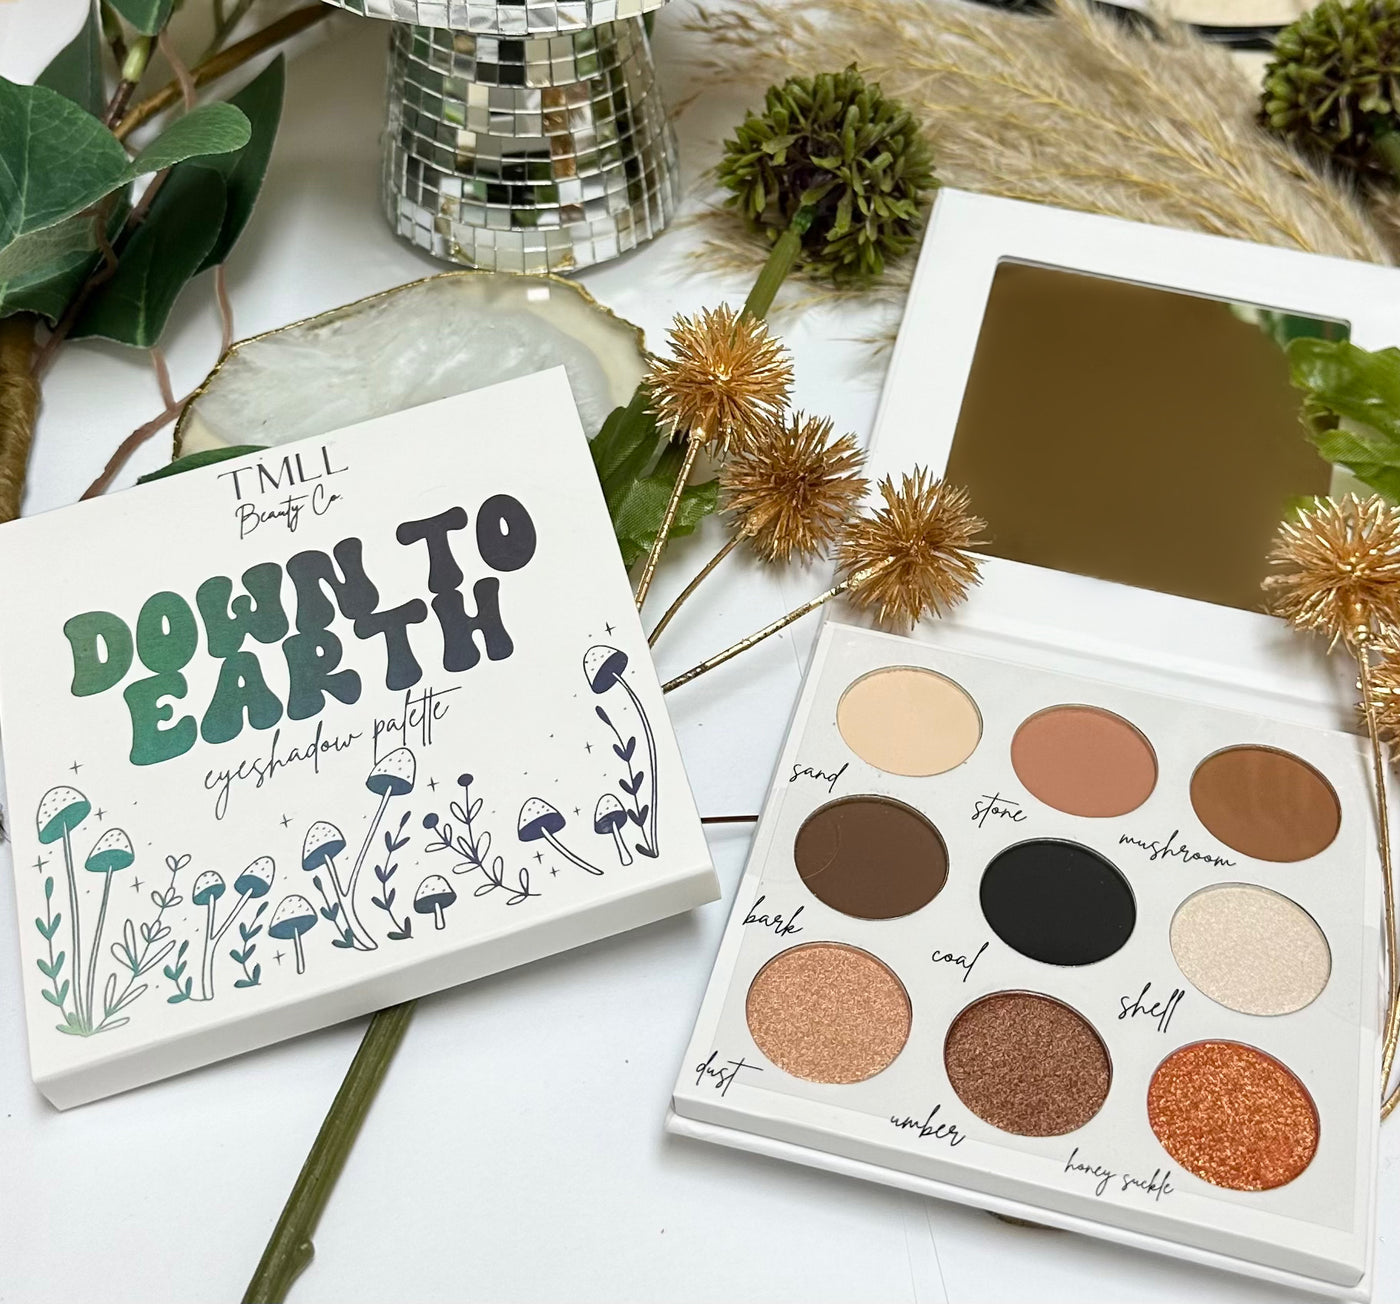 Down To Earth Eyeshadow Palette-250 - TMLL Beauty Co Taylor-TMLL Beauty Co-[option4]-[option5]-[option6]-Leather & Lace Boutique Shop